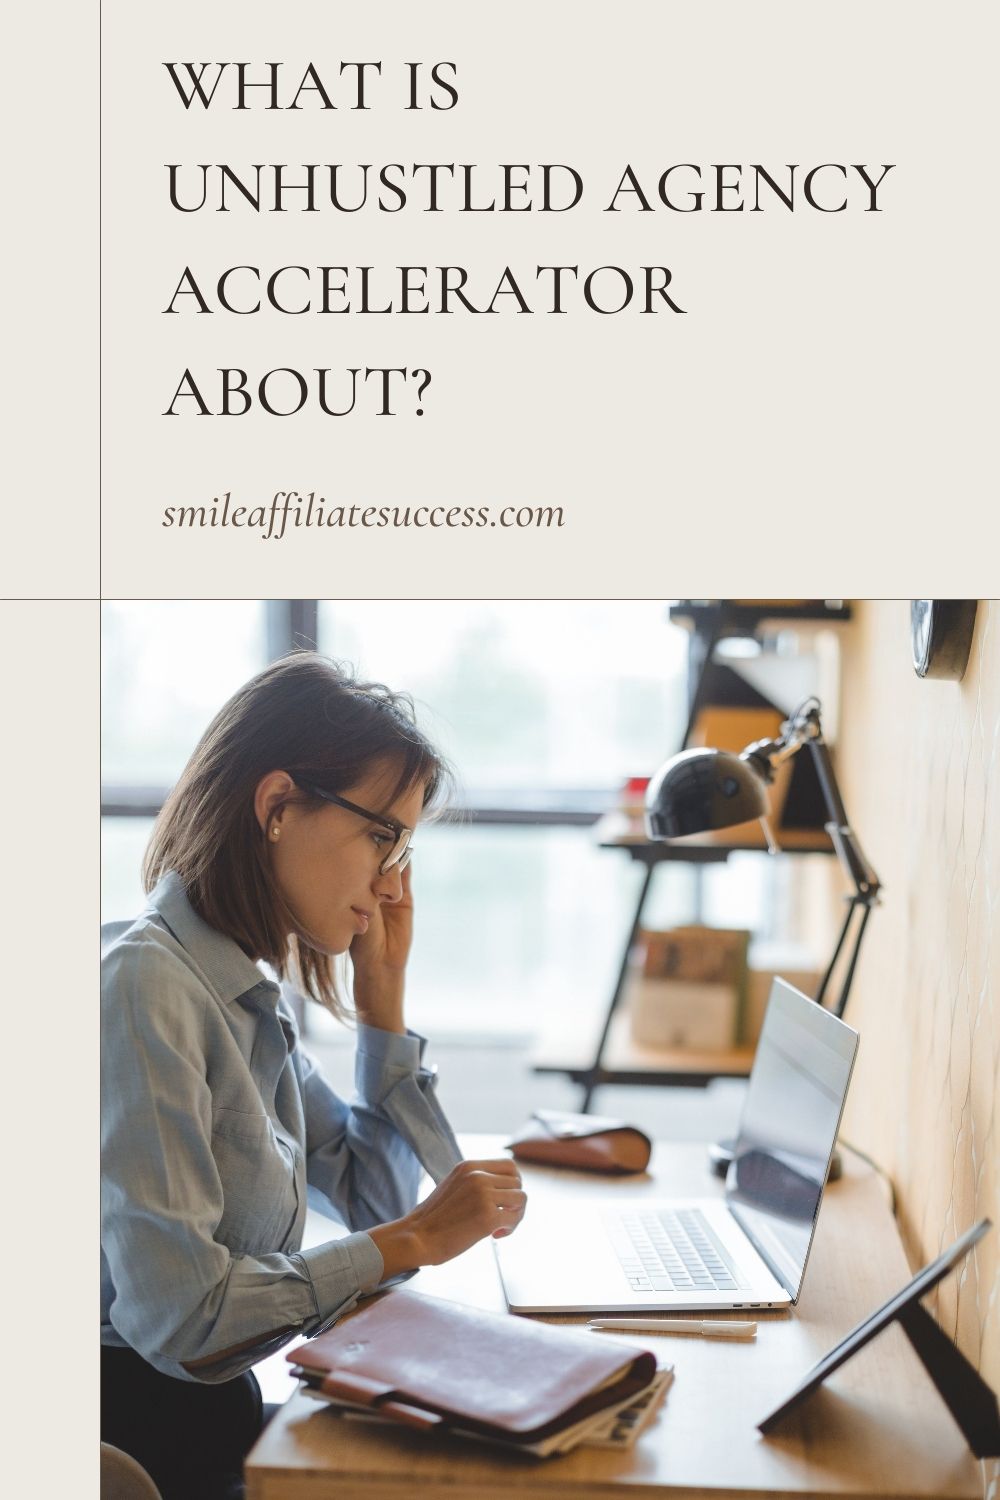 What Is UnHustled Agency Accelerator About?